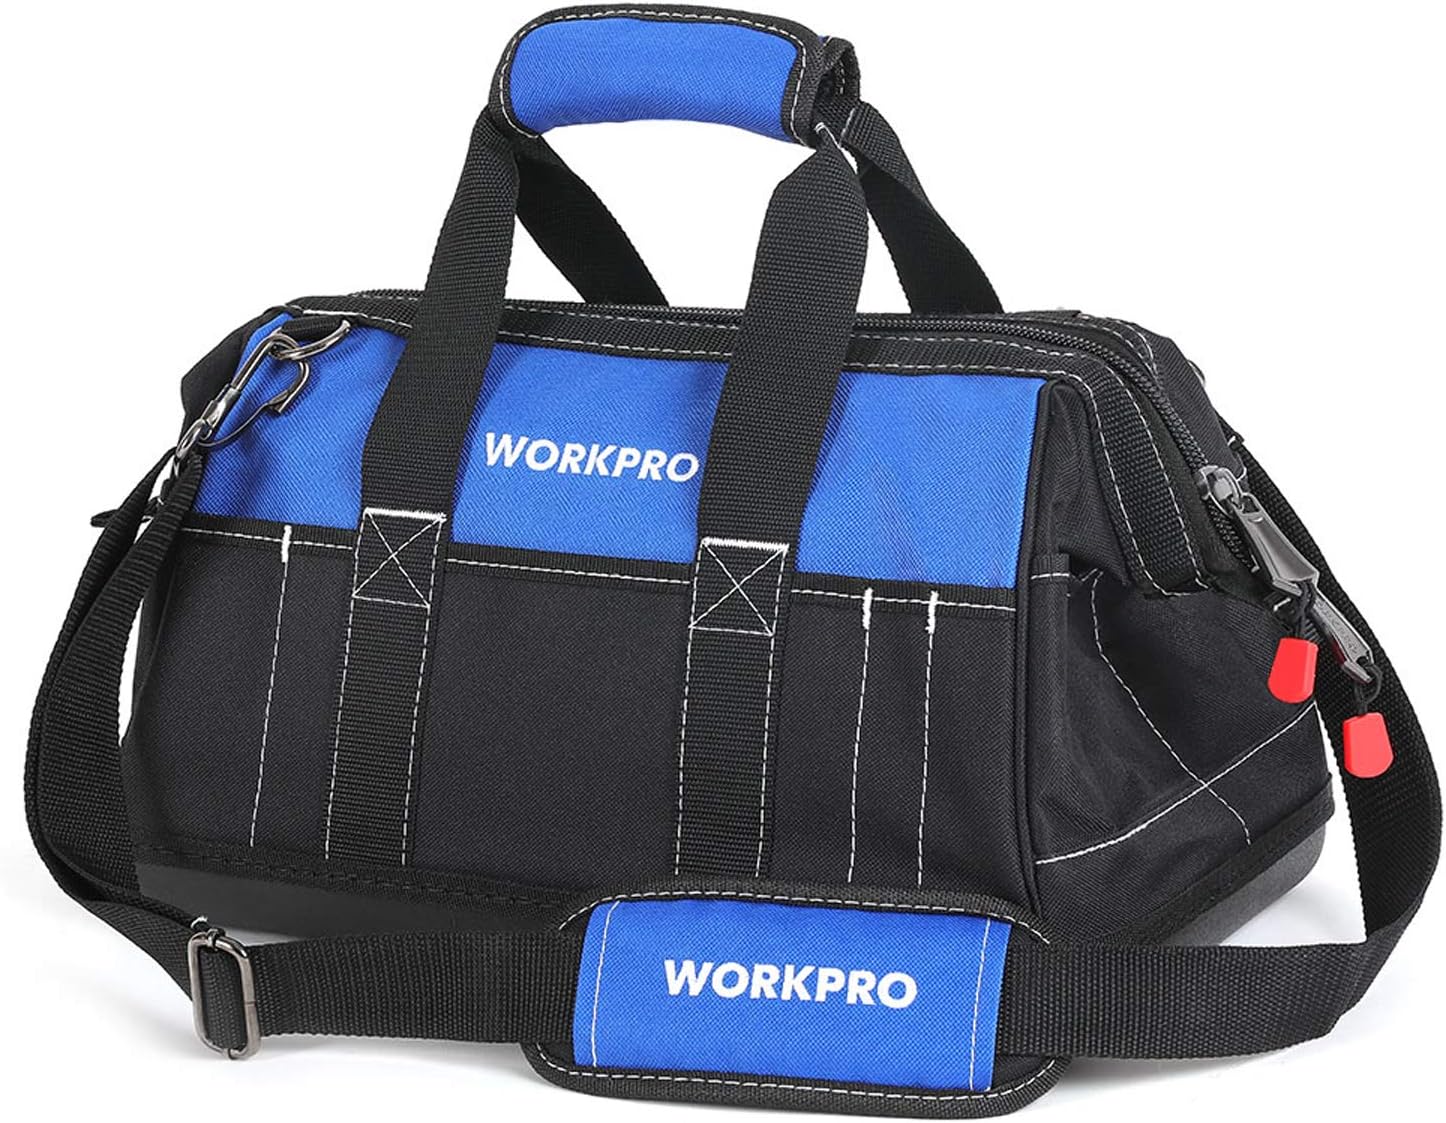 WORKPRO 16-inch Wide Mouth Tool Bag with Water Proof [...]